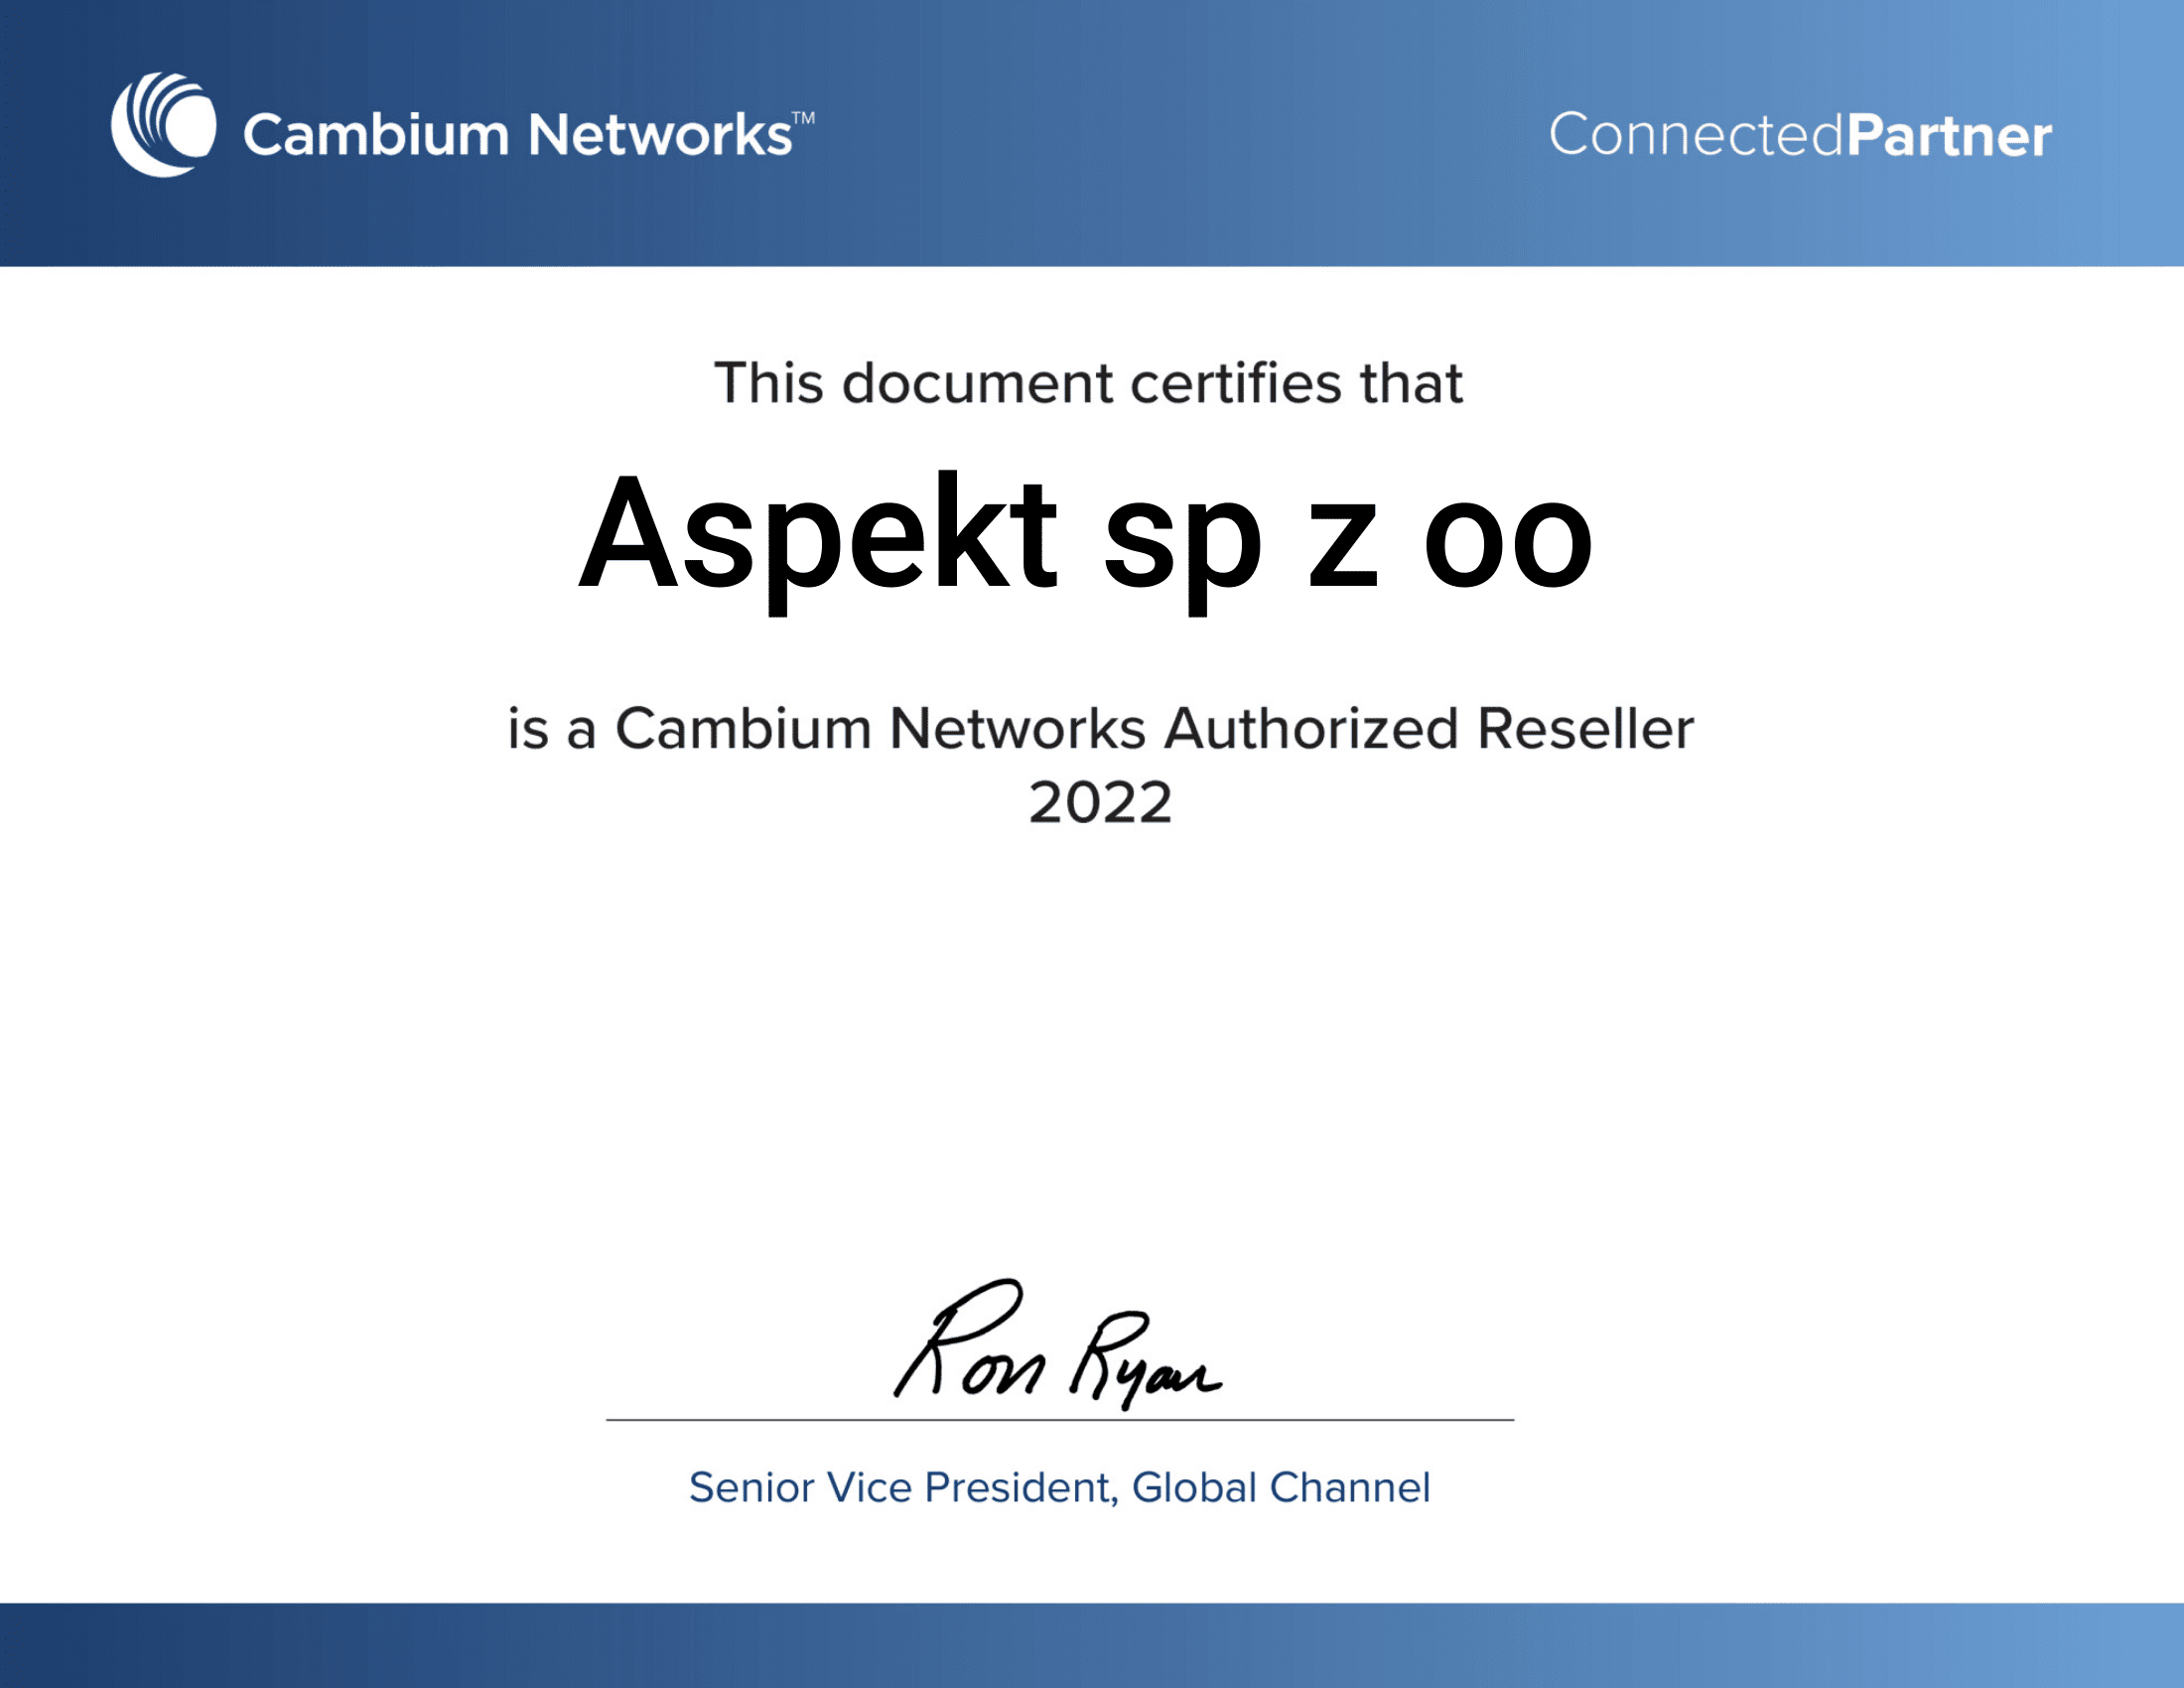 Cambium Networks Connected Partner Program